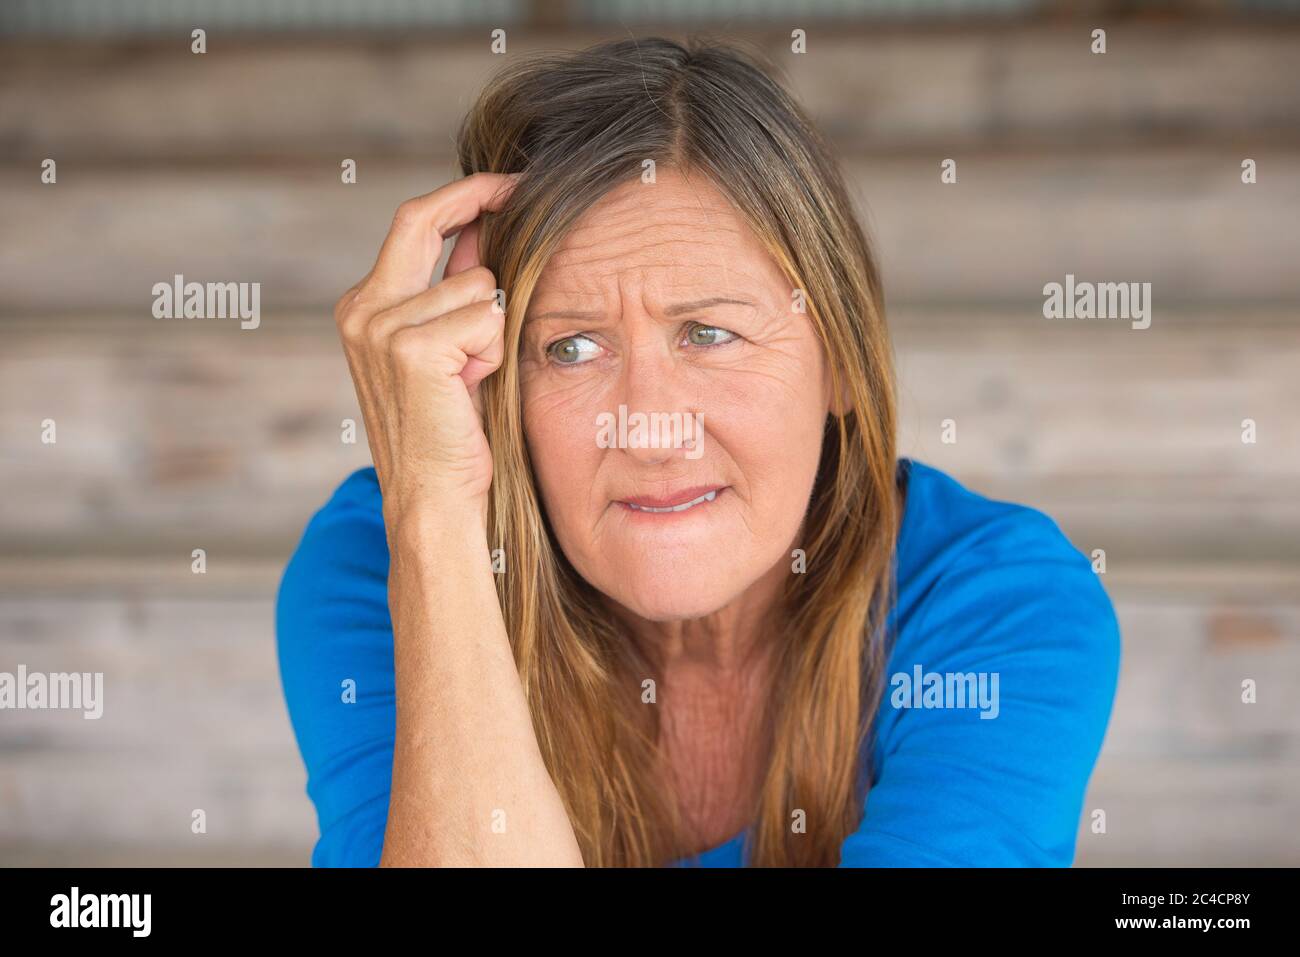 Portrait attractive mature woman with upset thoughtful angry facial expression, lonely worried, blurred background. Stock Photo